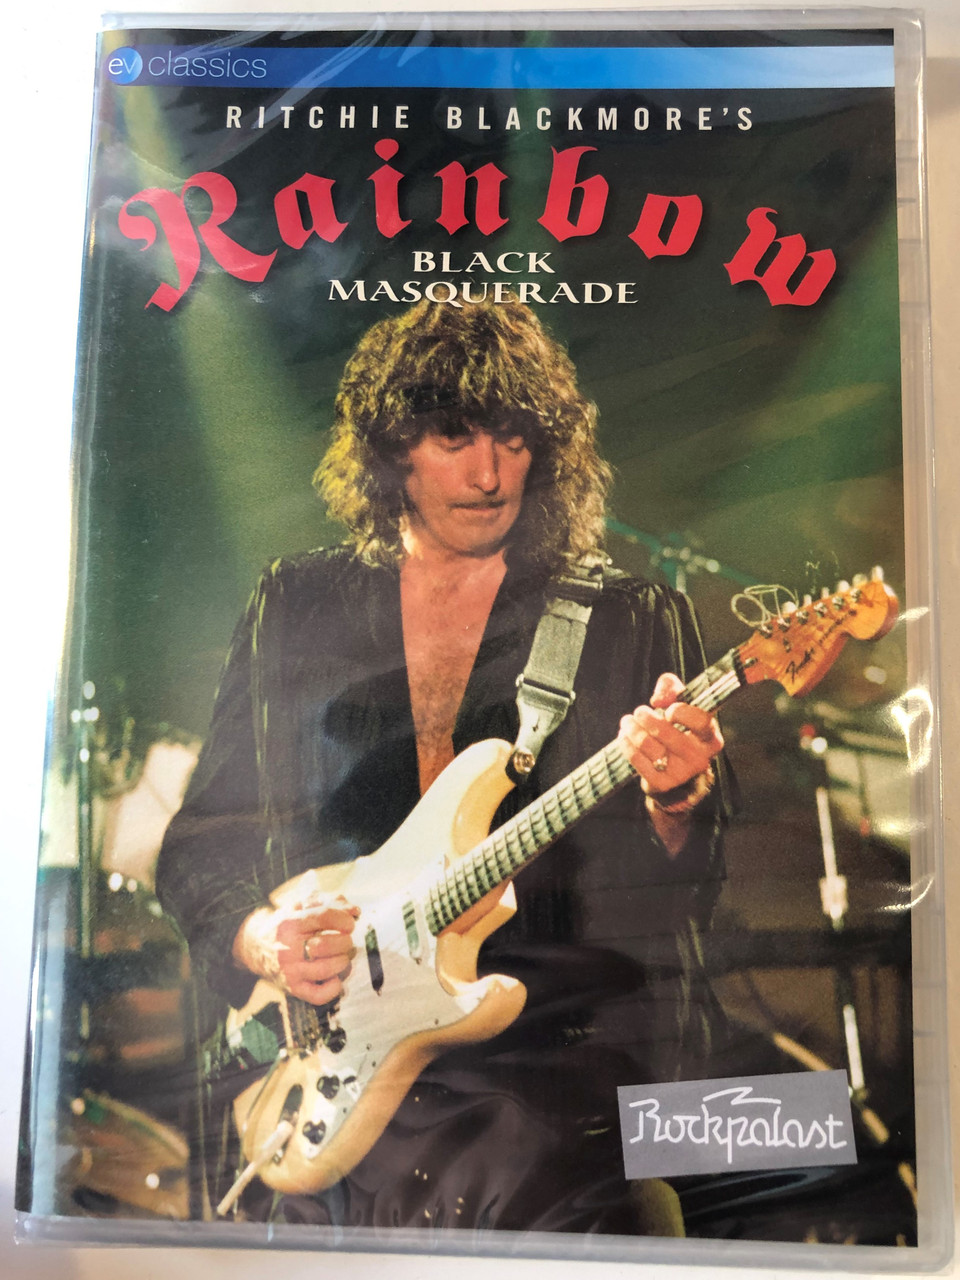 Ritchie Blackmore's Rainbow DVD 1995 Black Masquerade / Directed by Gerd F.  Schultre / Too late for tears, Still I'm sad, Ariel, Greensleeves / Eagle  Vision Classics - bibleinmylanguage